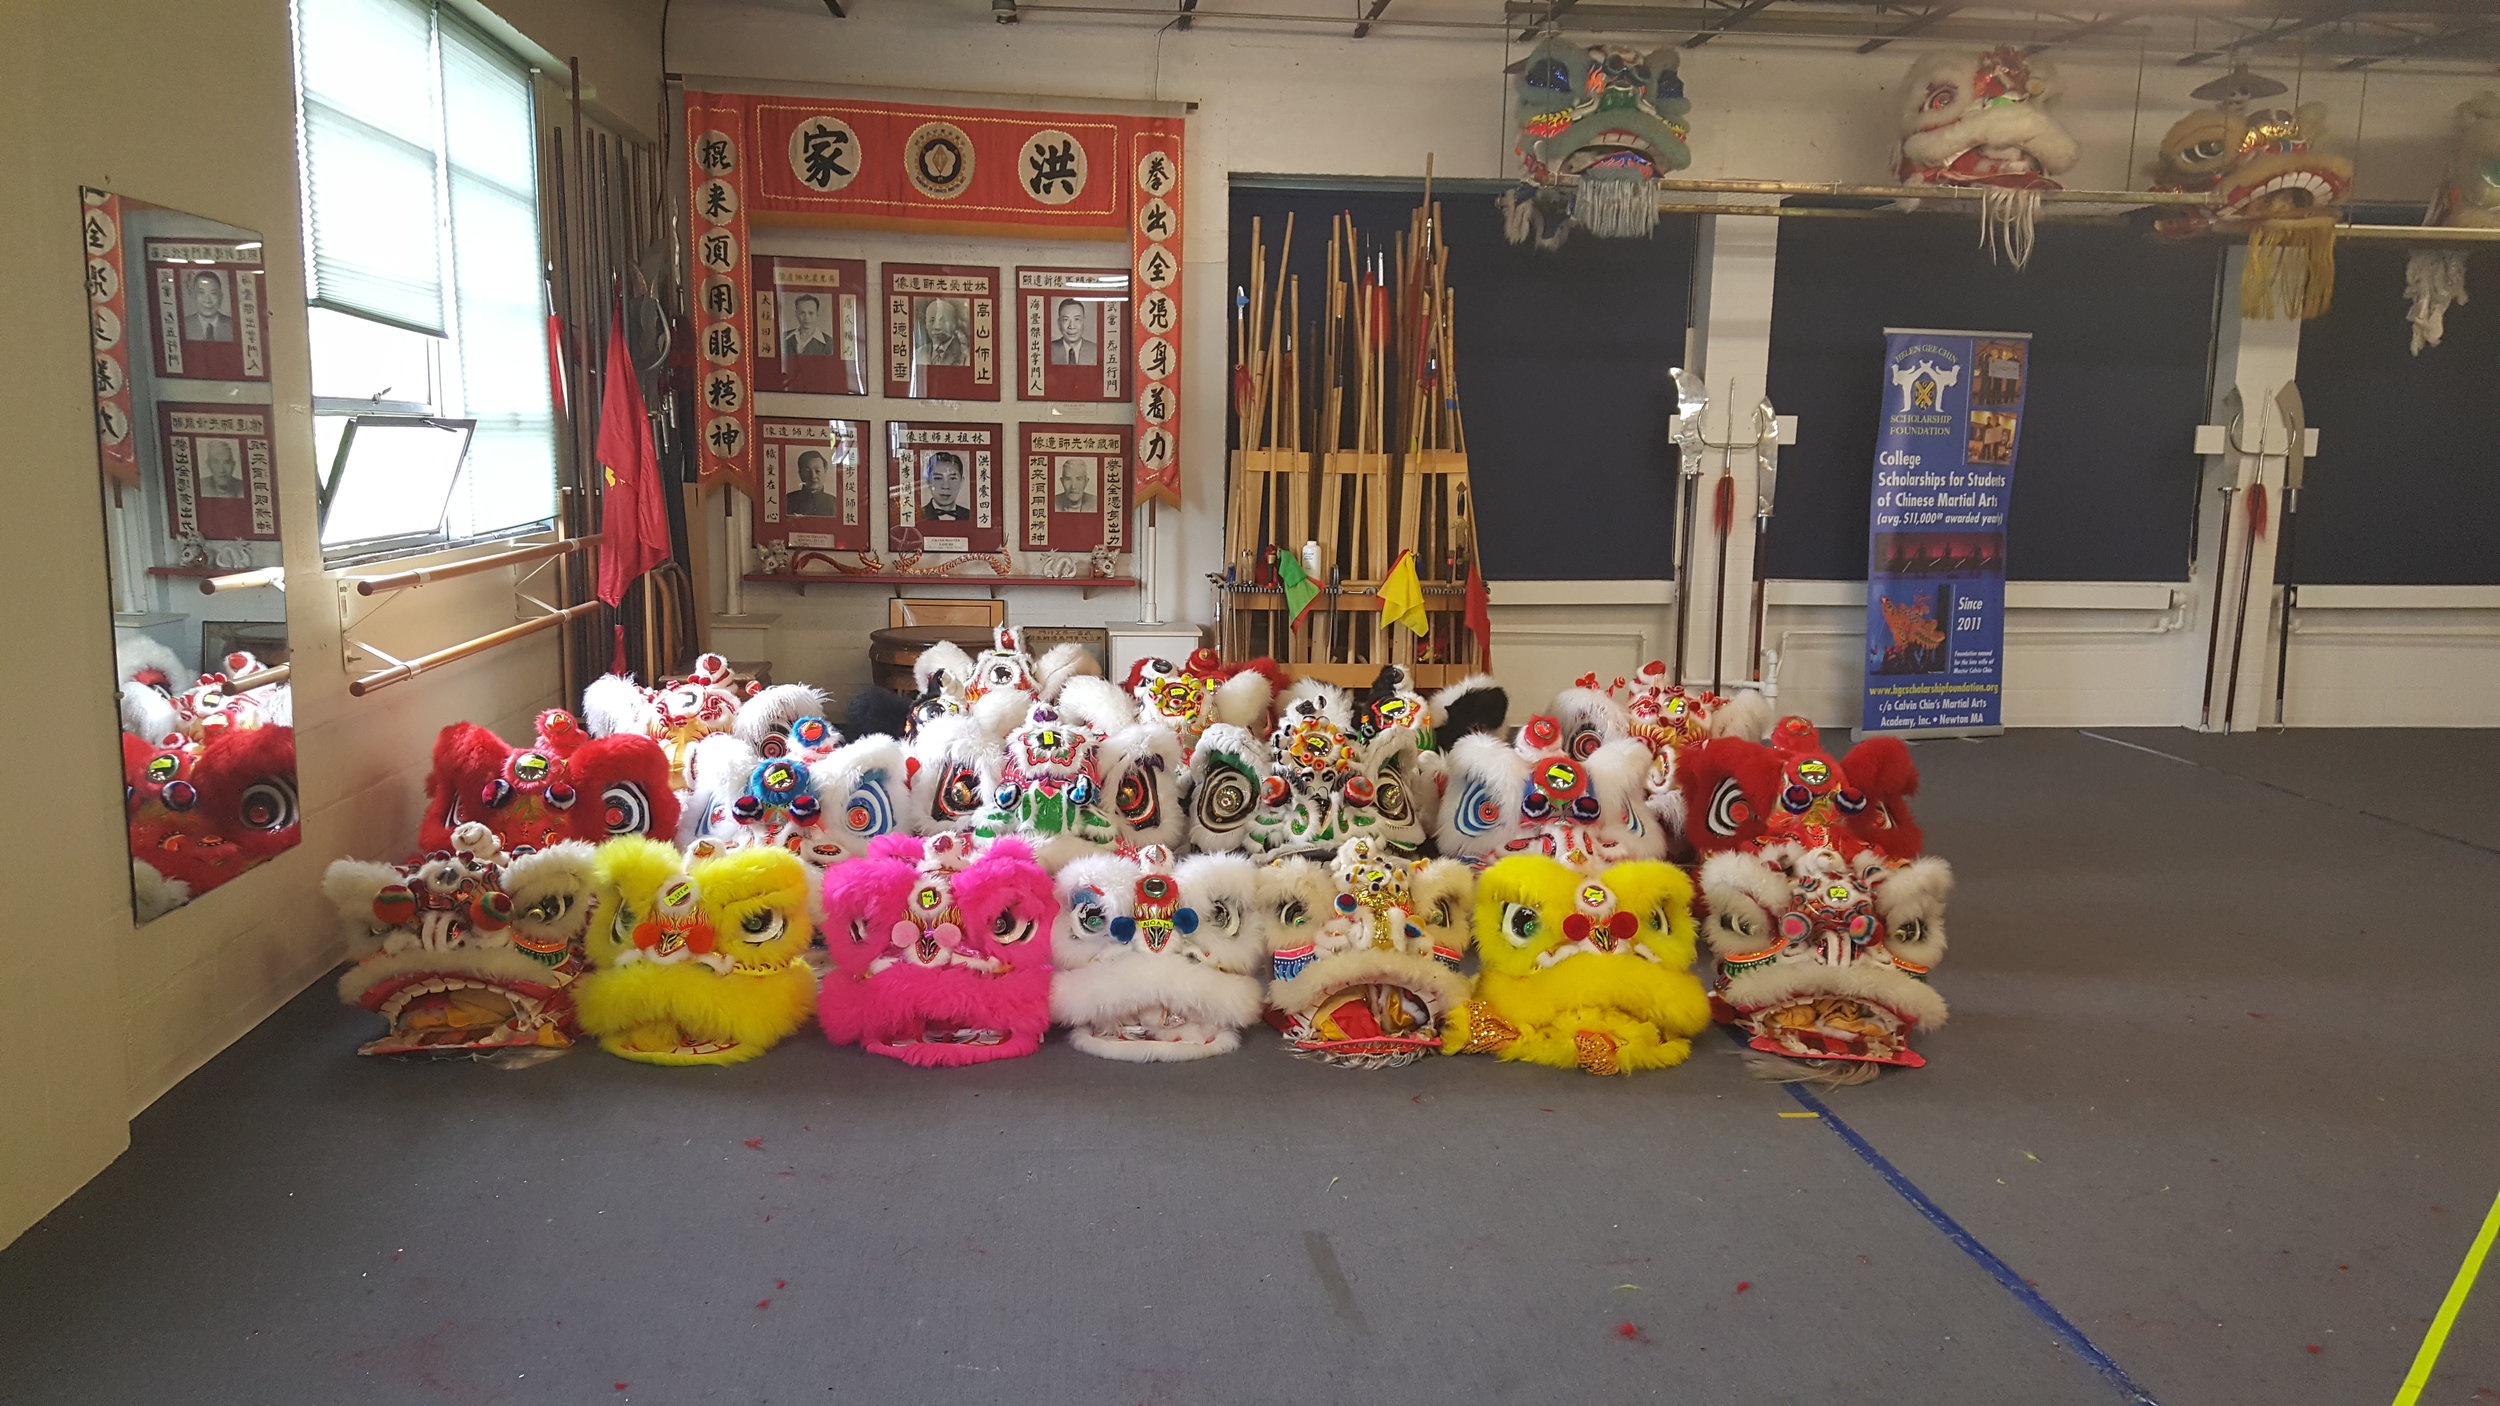 20 Lions Ready for annual performance